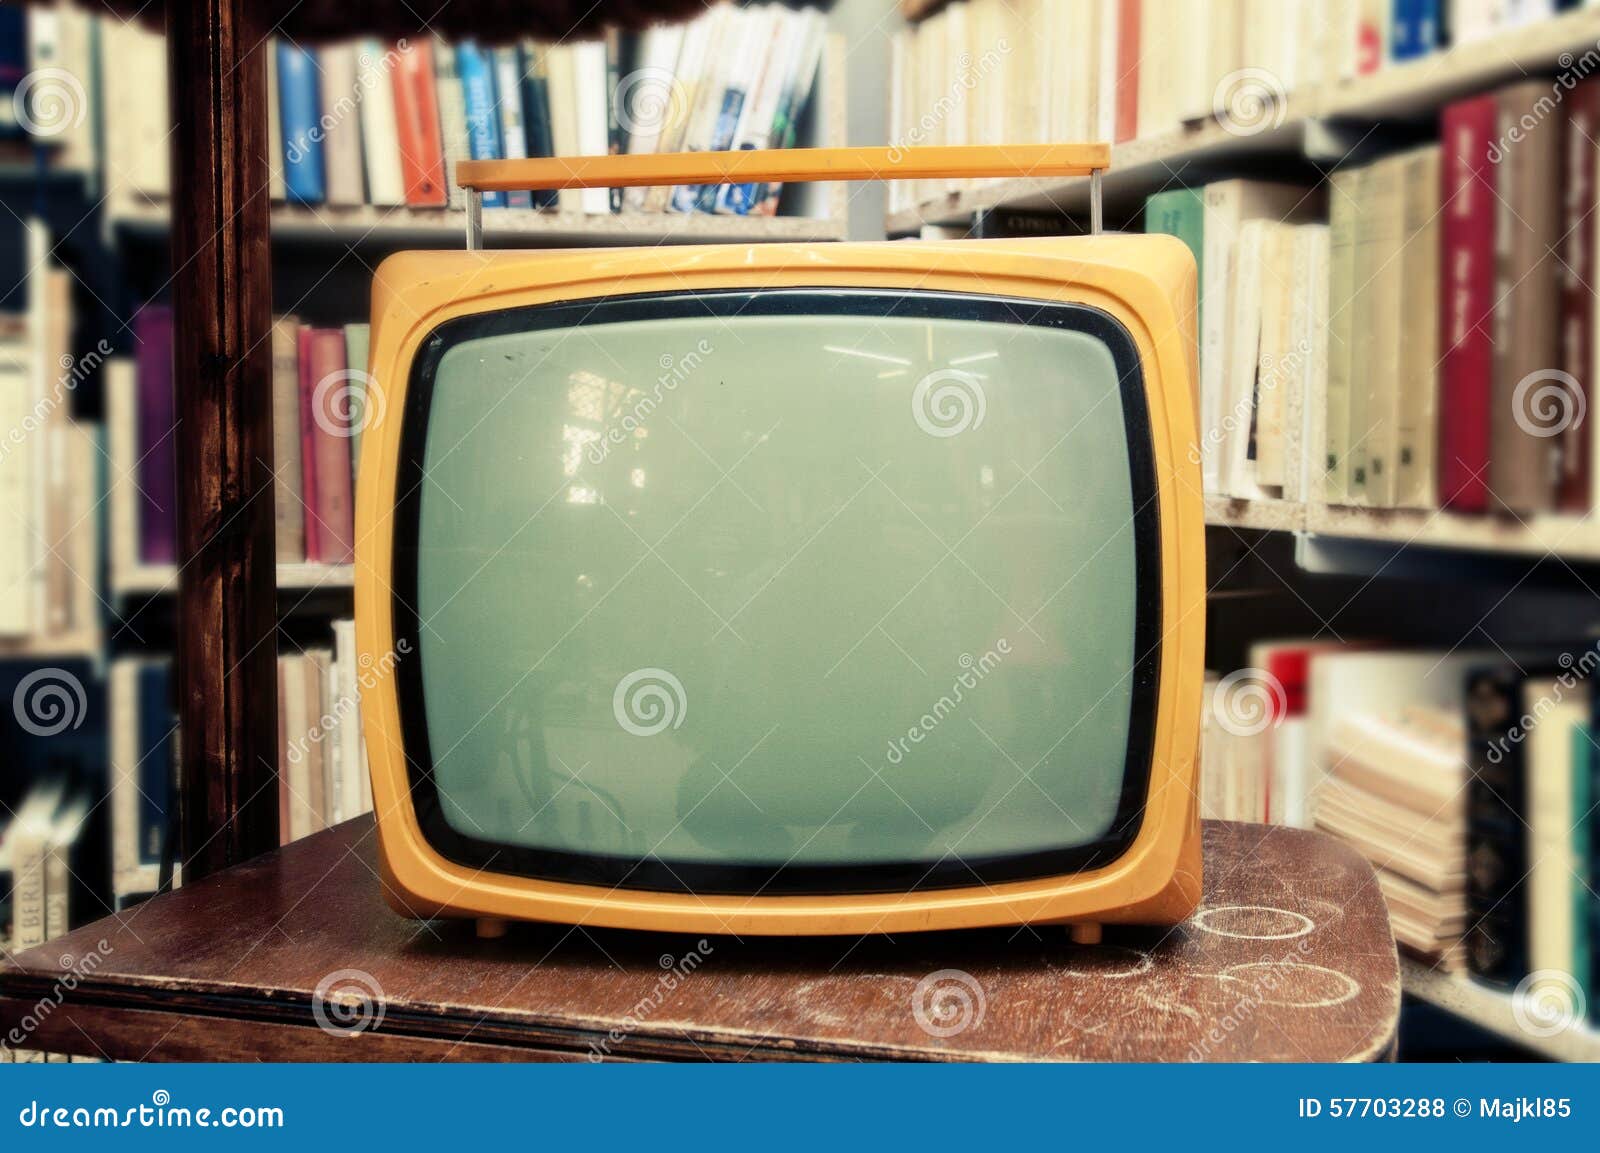 Retro TV Set In Vintage Setting Old Living Room Stock Photo